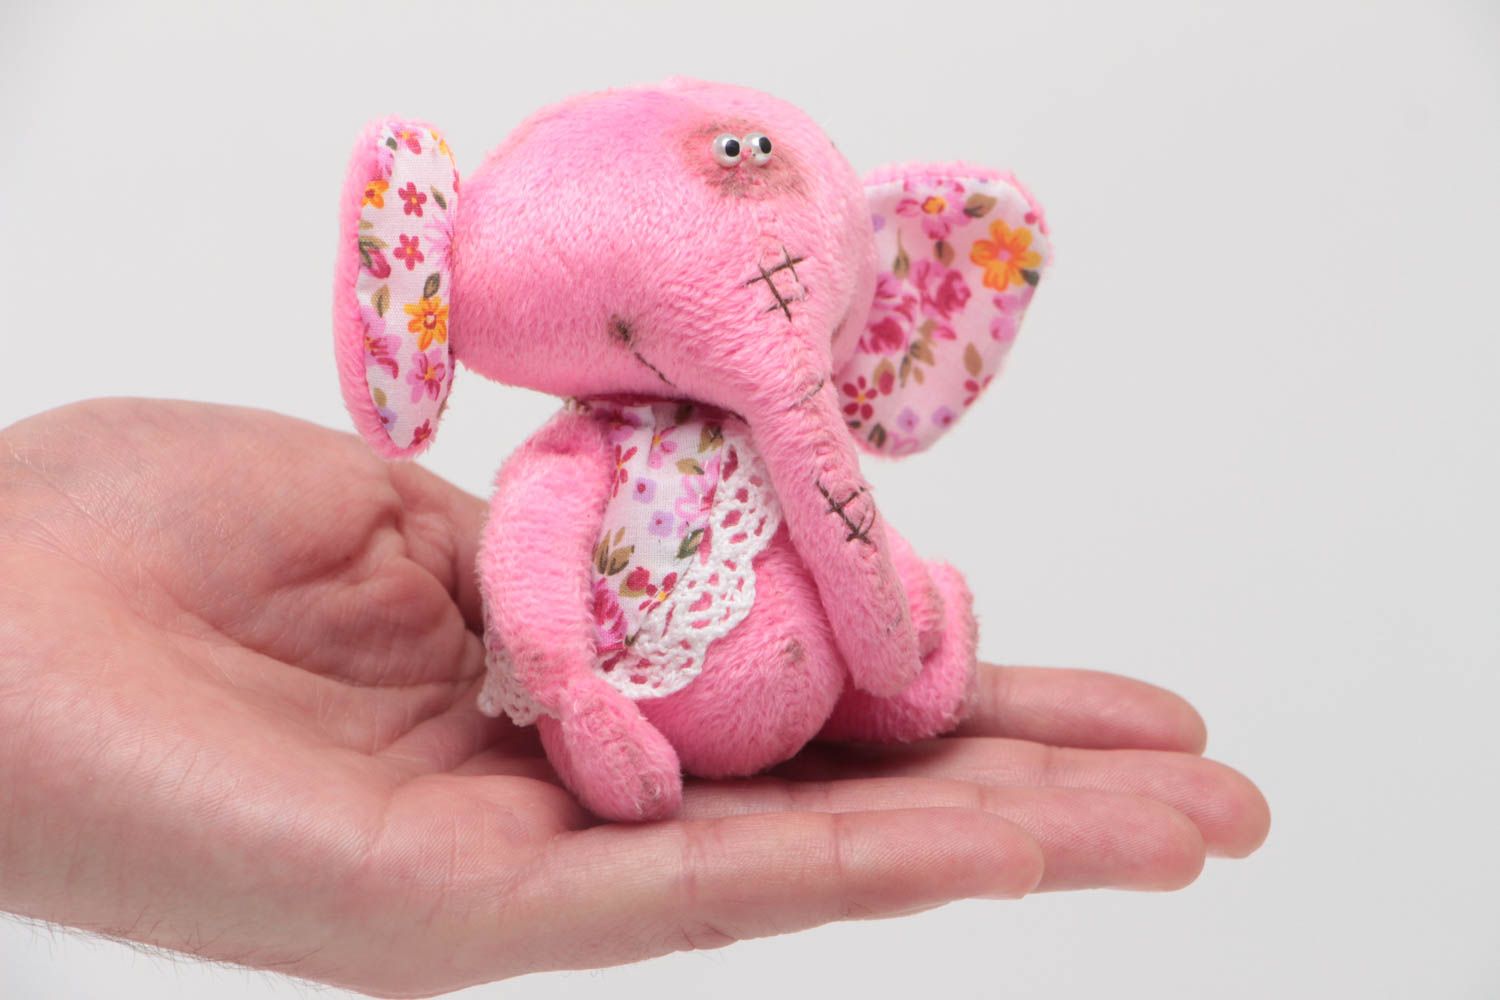 Handmade small vintage soft toy sewn of plush pink elephant with floral ears photo 5